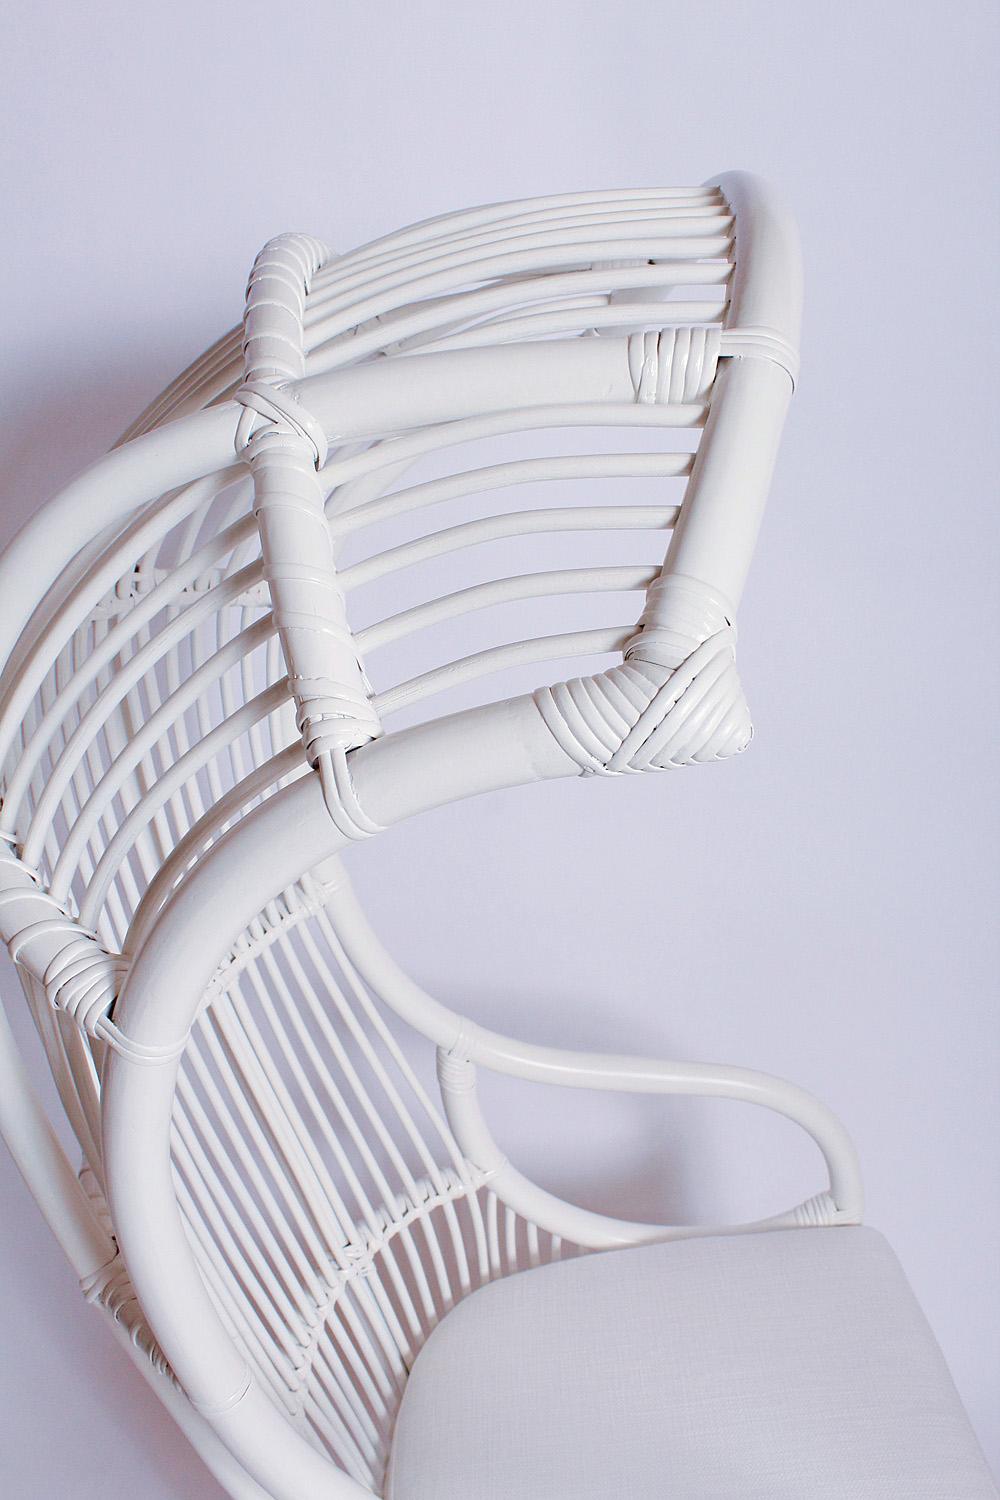 Organic Modern White Bamboo and Rattan Canopy Chair by Henry Olko for Willow and Reed